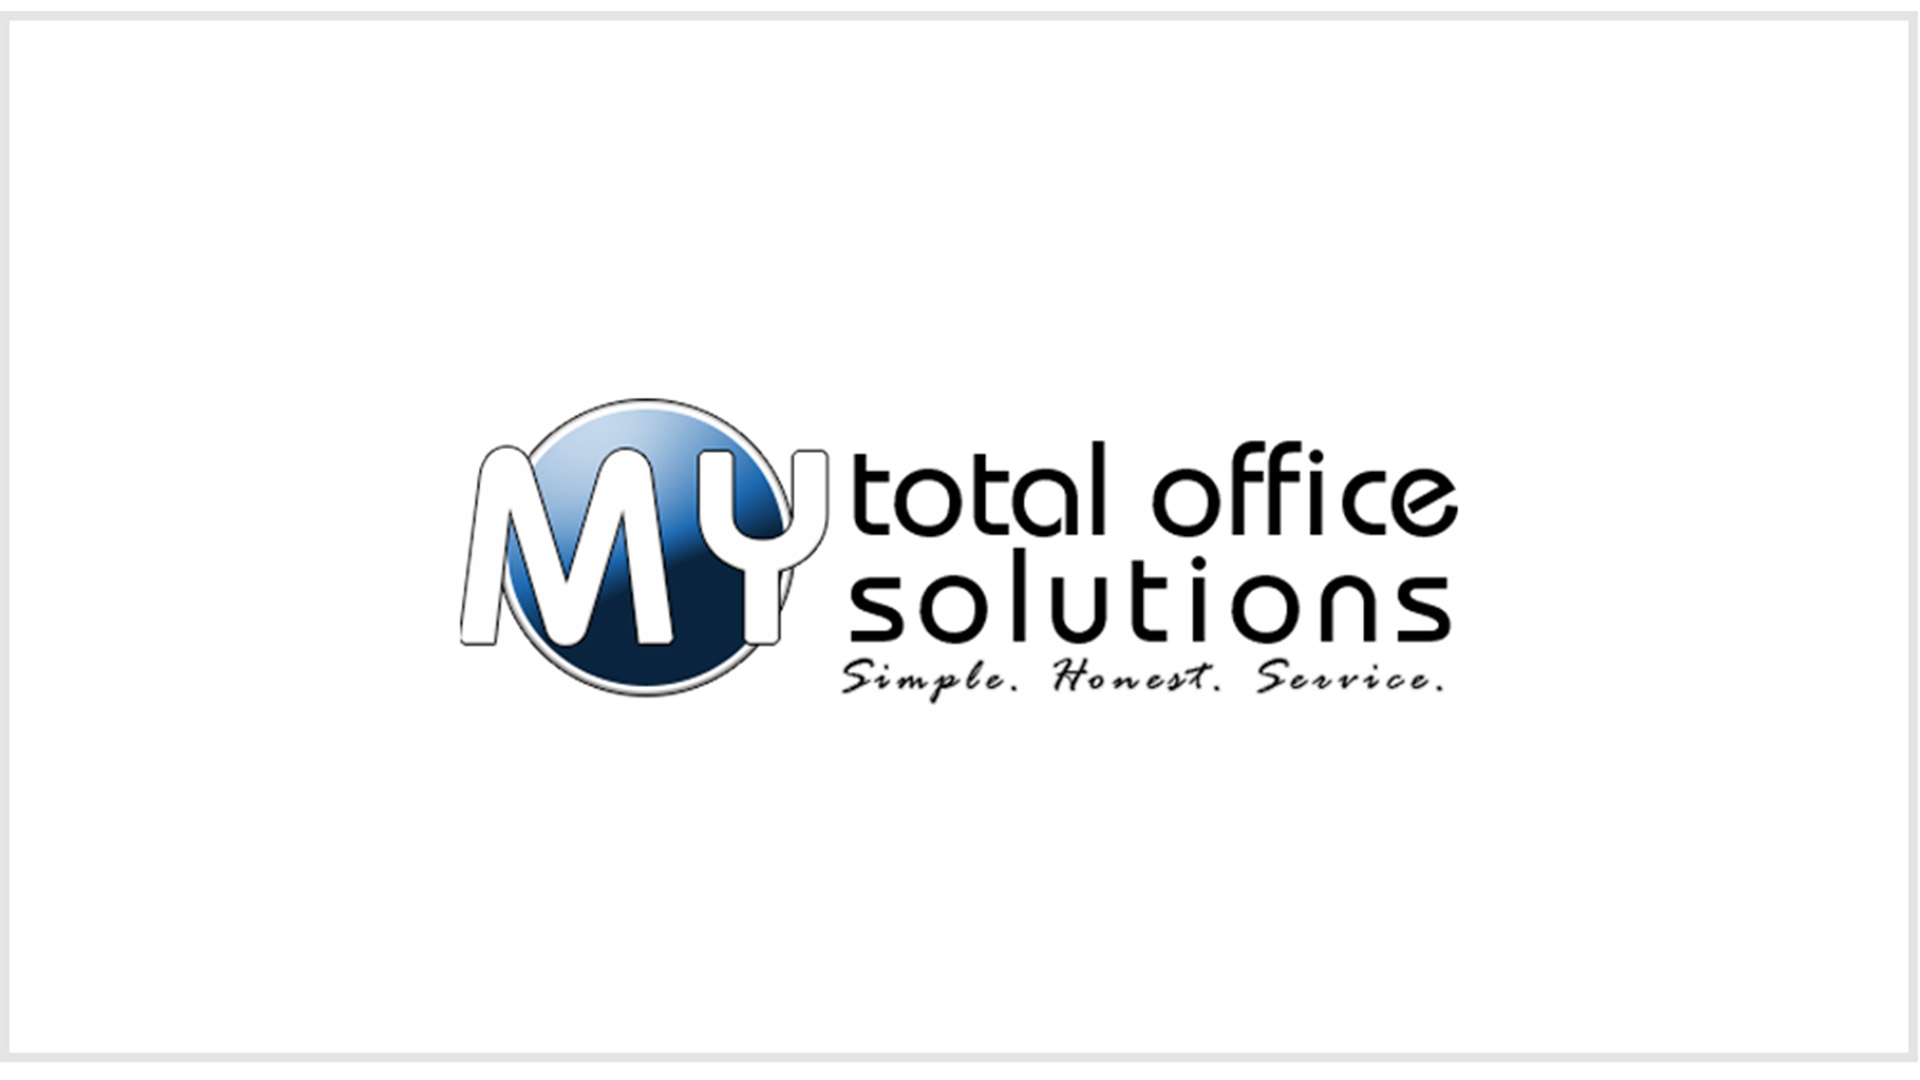 My Total Office Solutions business logo